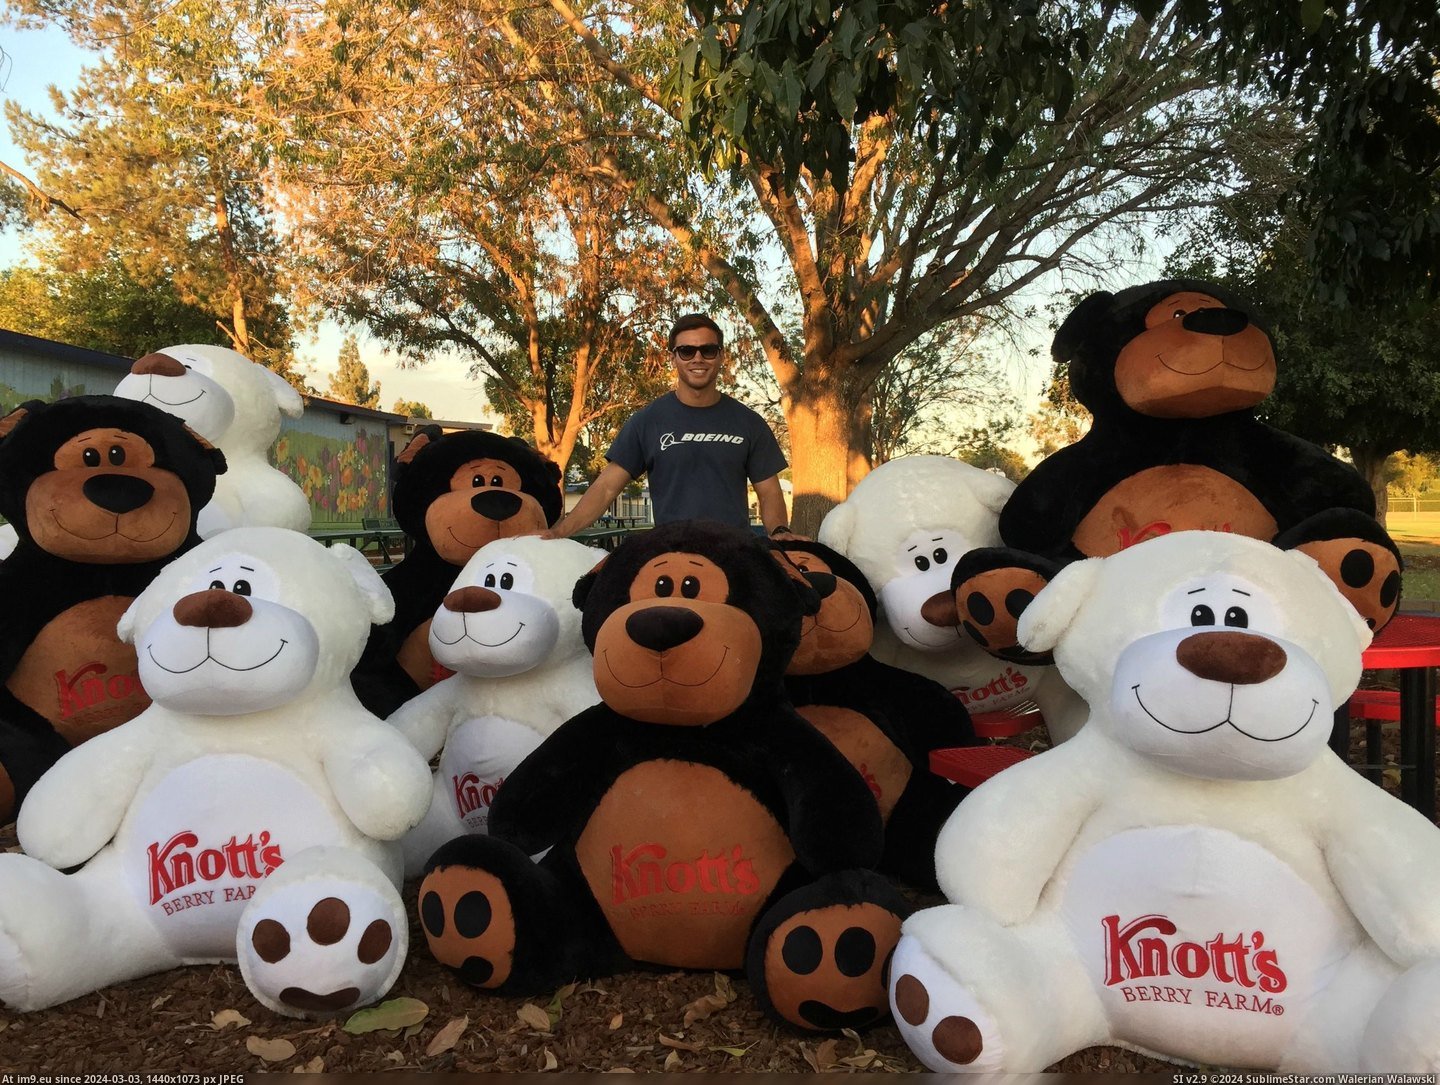 #Funny #Thought #Farm #Bears #Berry #Giant #Win [Funny] I was so preoccupied with the thought of whether or not I could win 10 giant bears from Knott's Berry Farm, I didn't sto Pic. (Image of album My r/FUNNY favs))